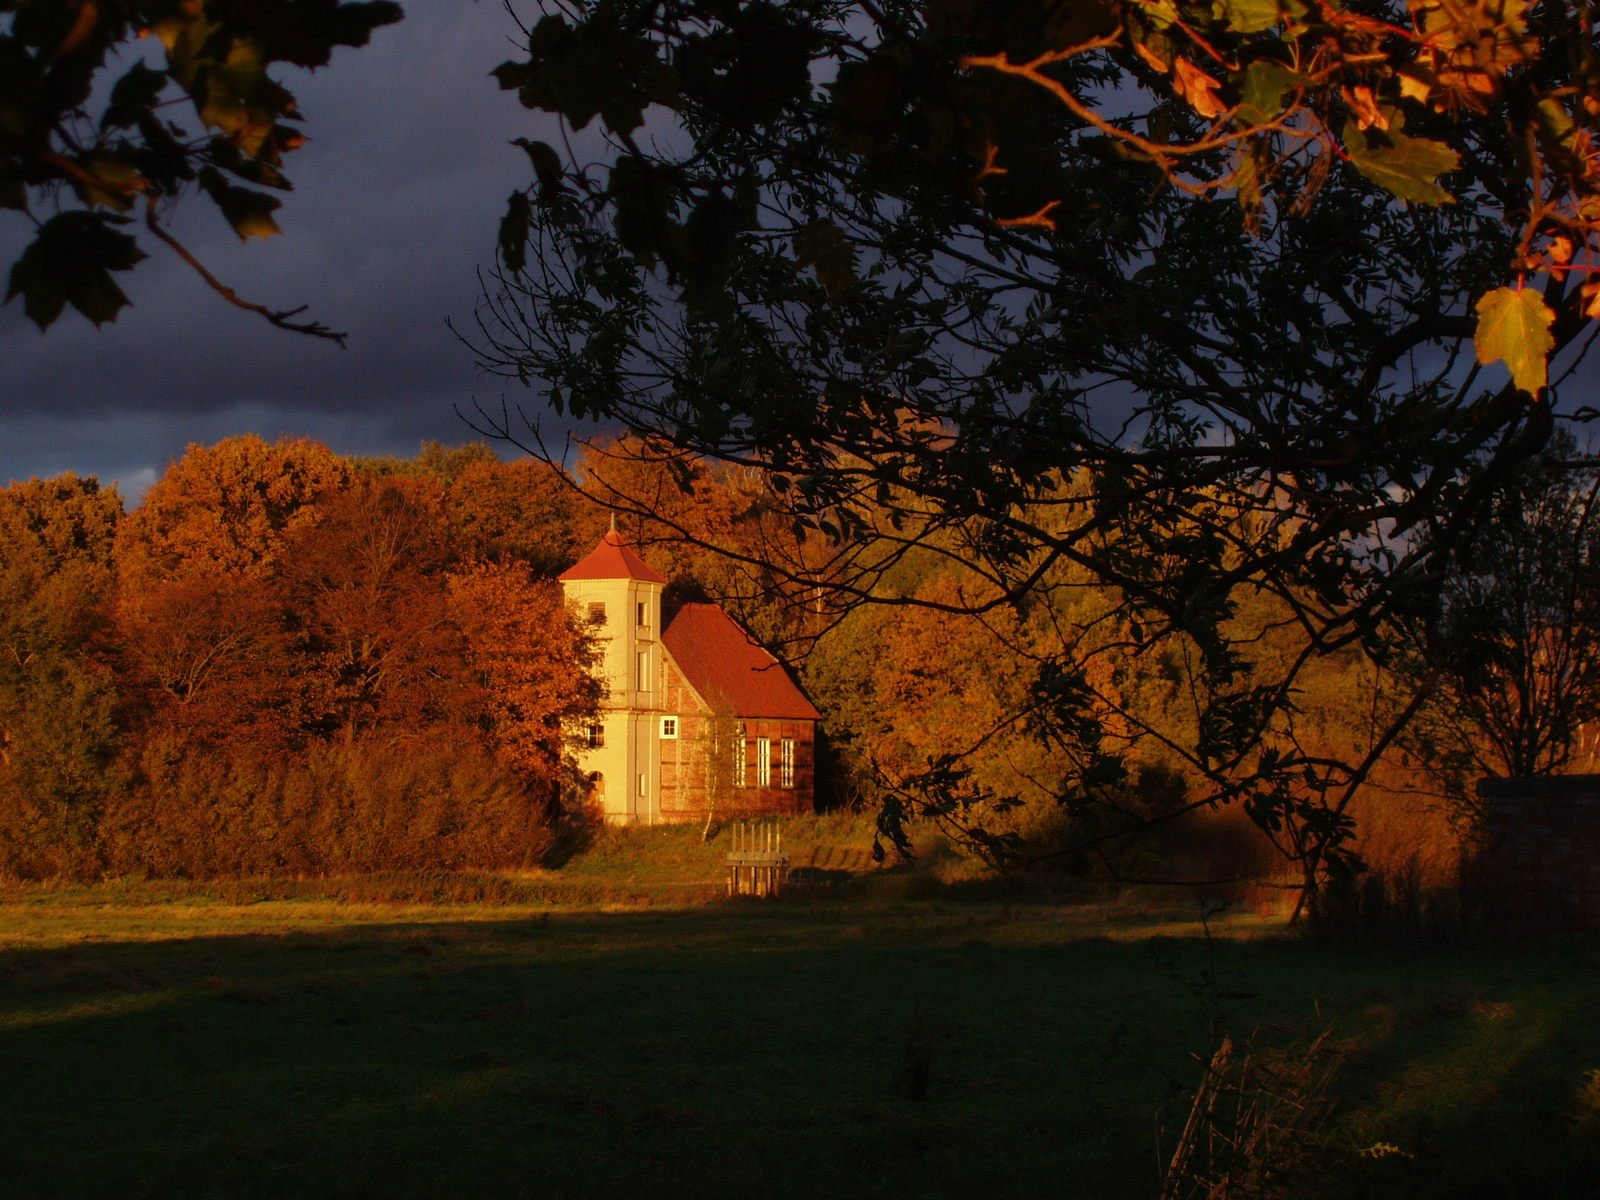 a house sits in a rural setting on an autumn day